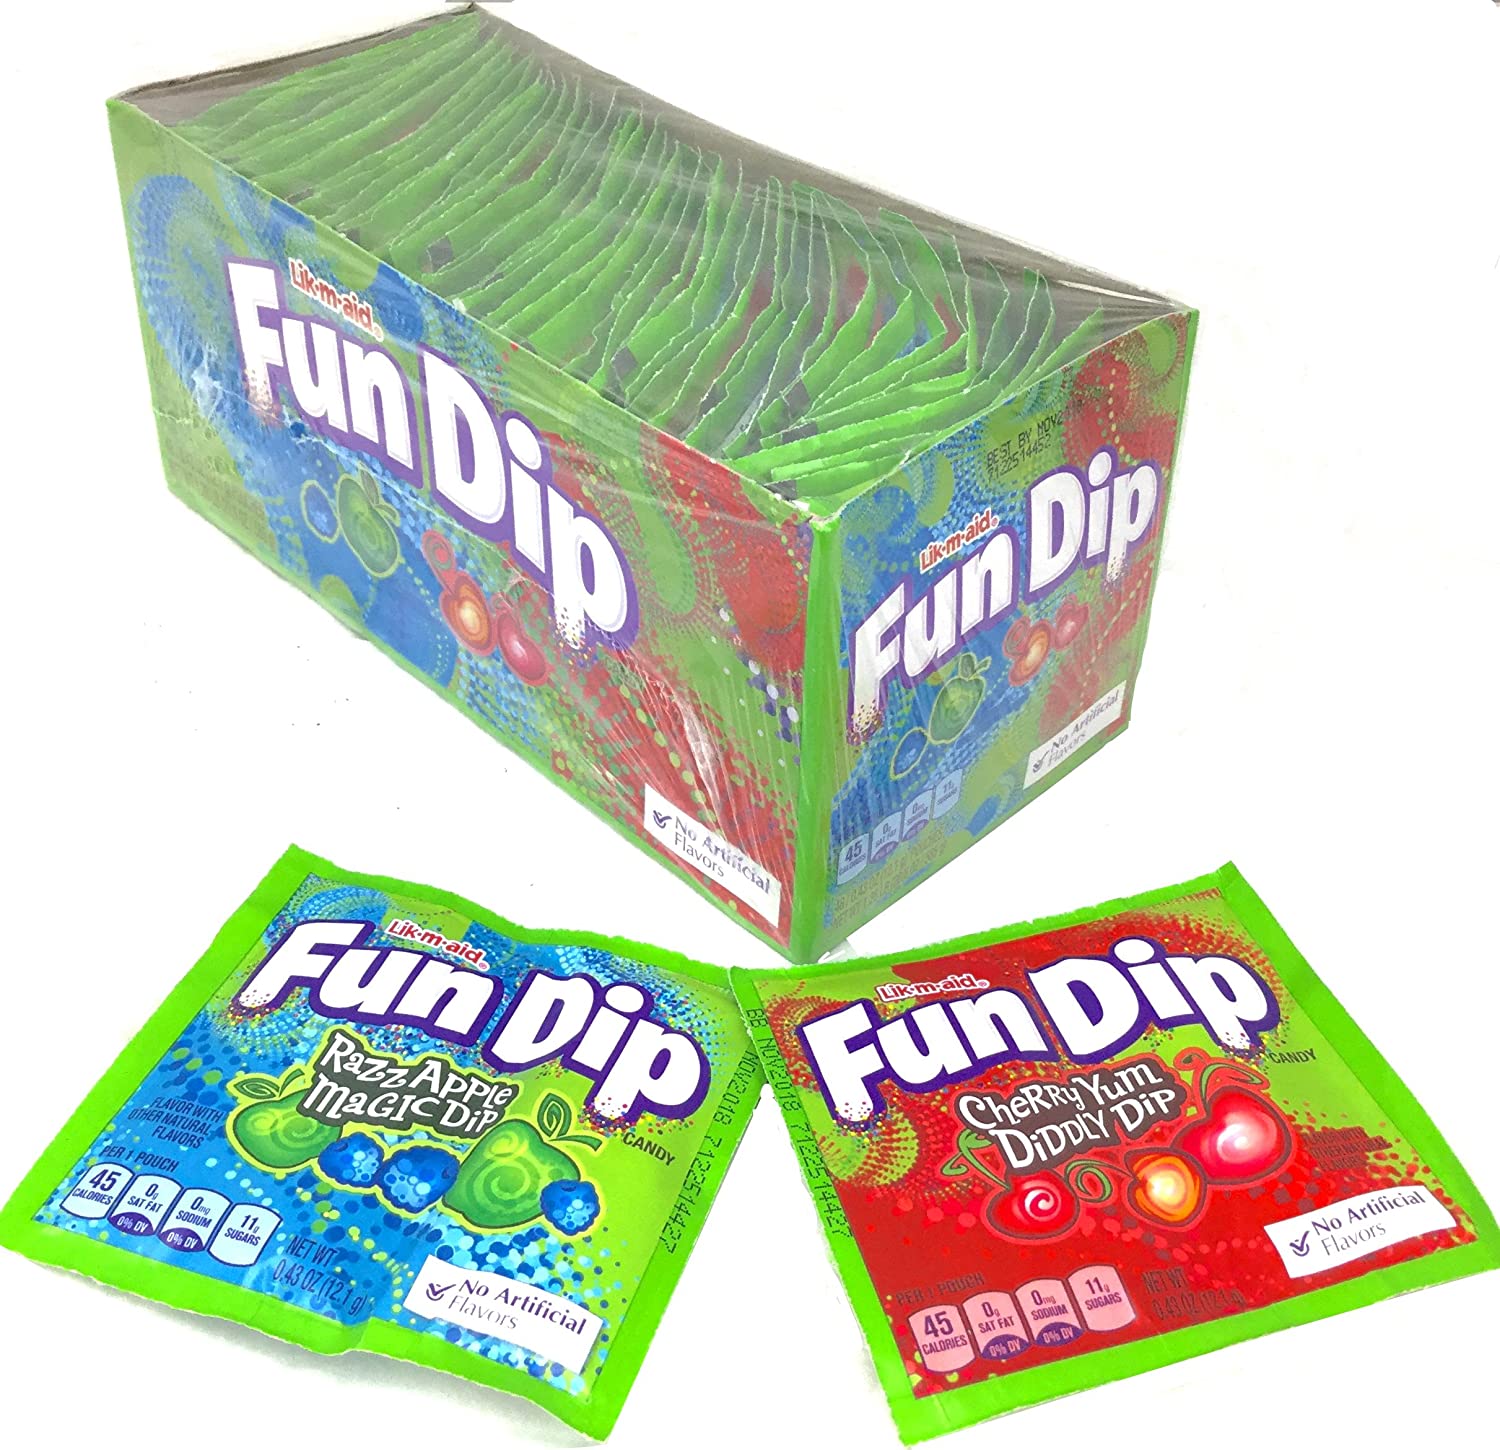 Lik-m-aid Fun Dip Candy Variety Pack, 48-Count